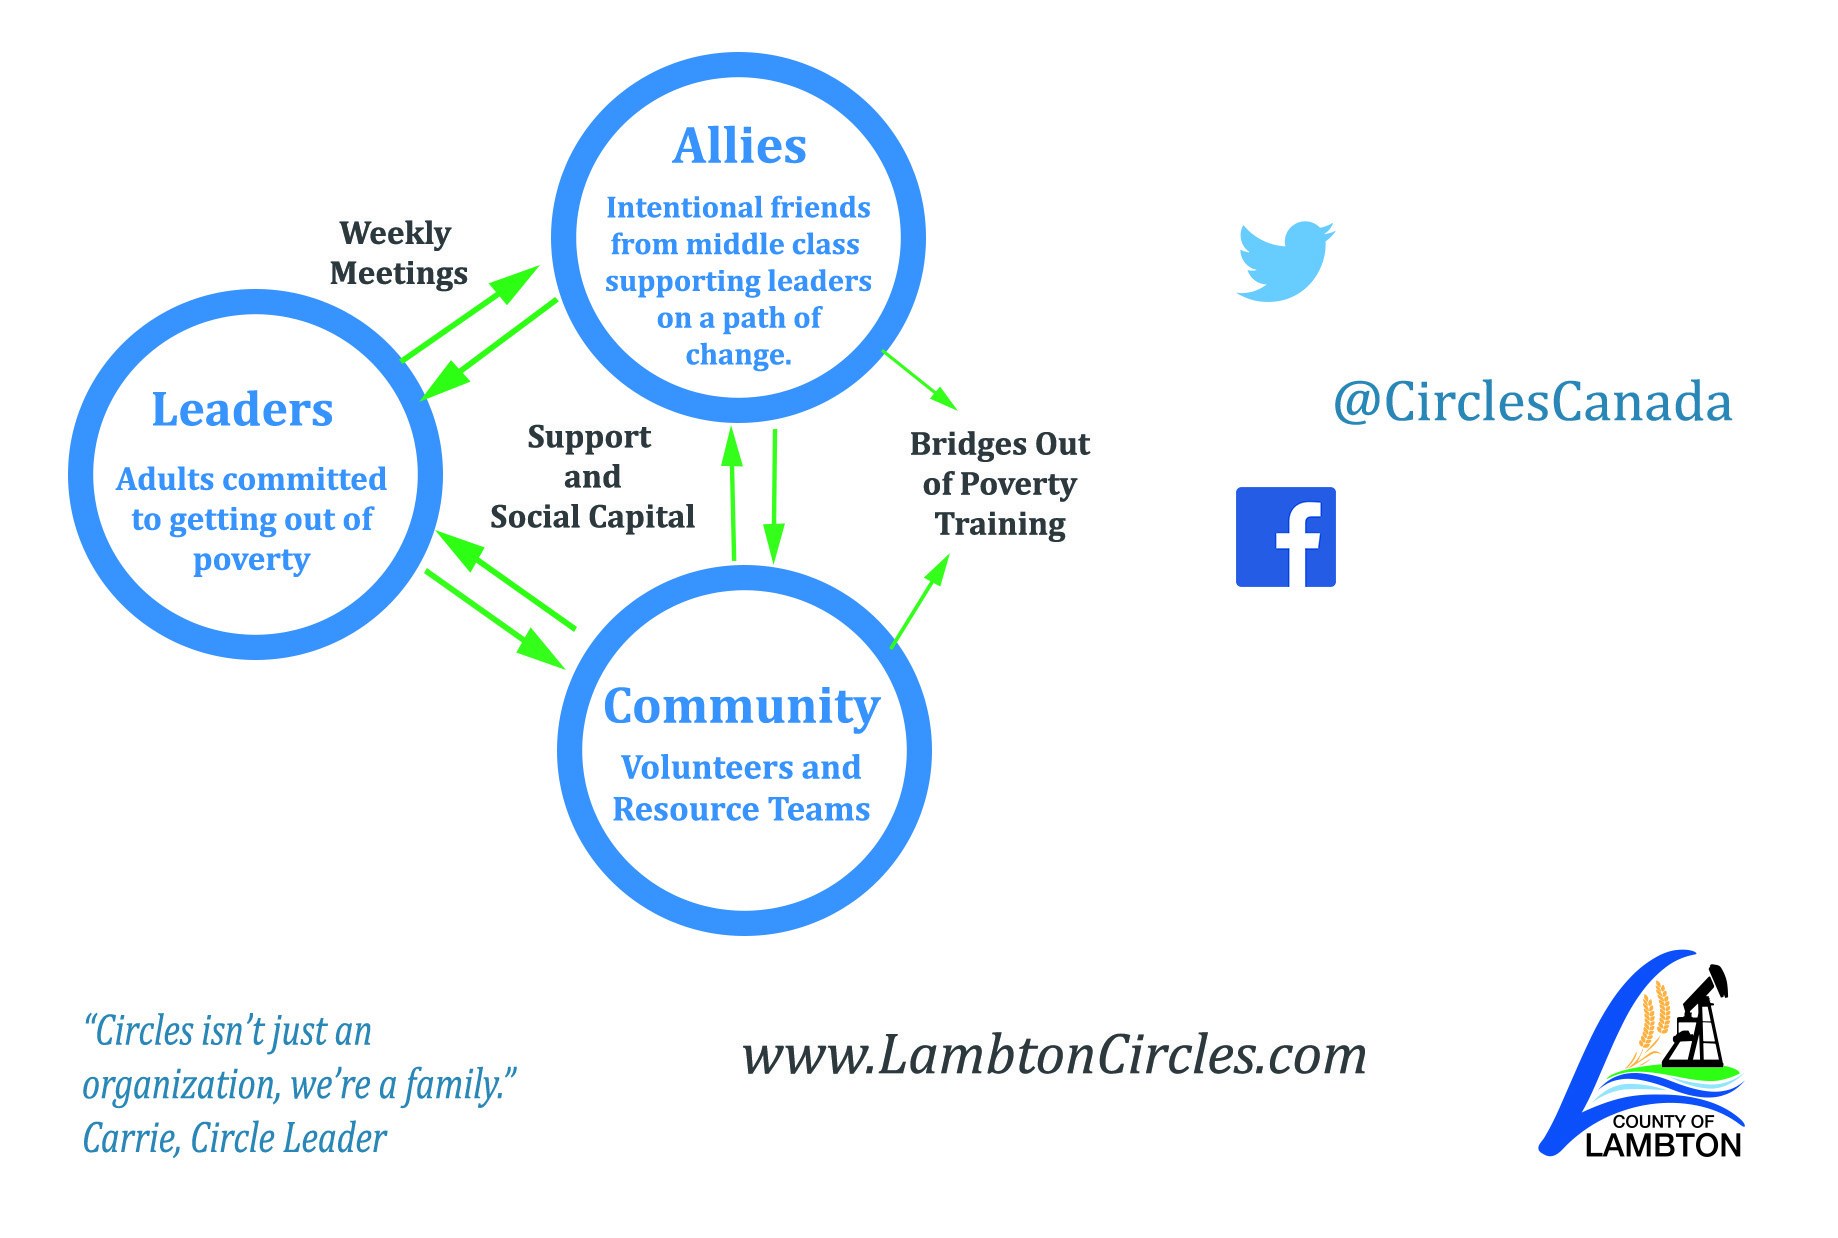 Circles infographic showing the Circles format and structure